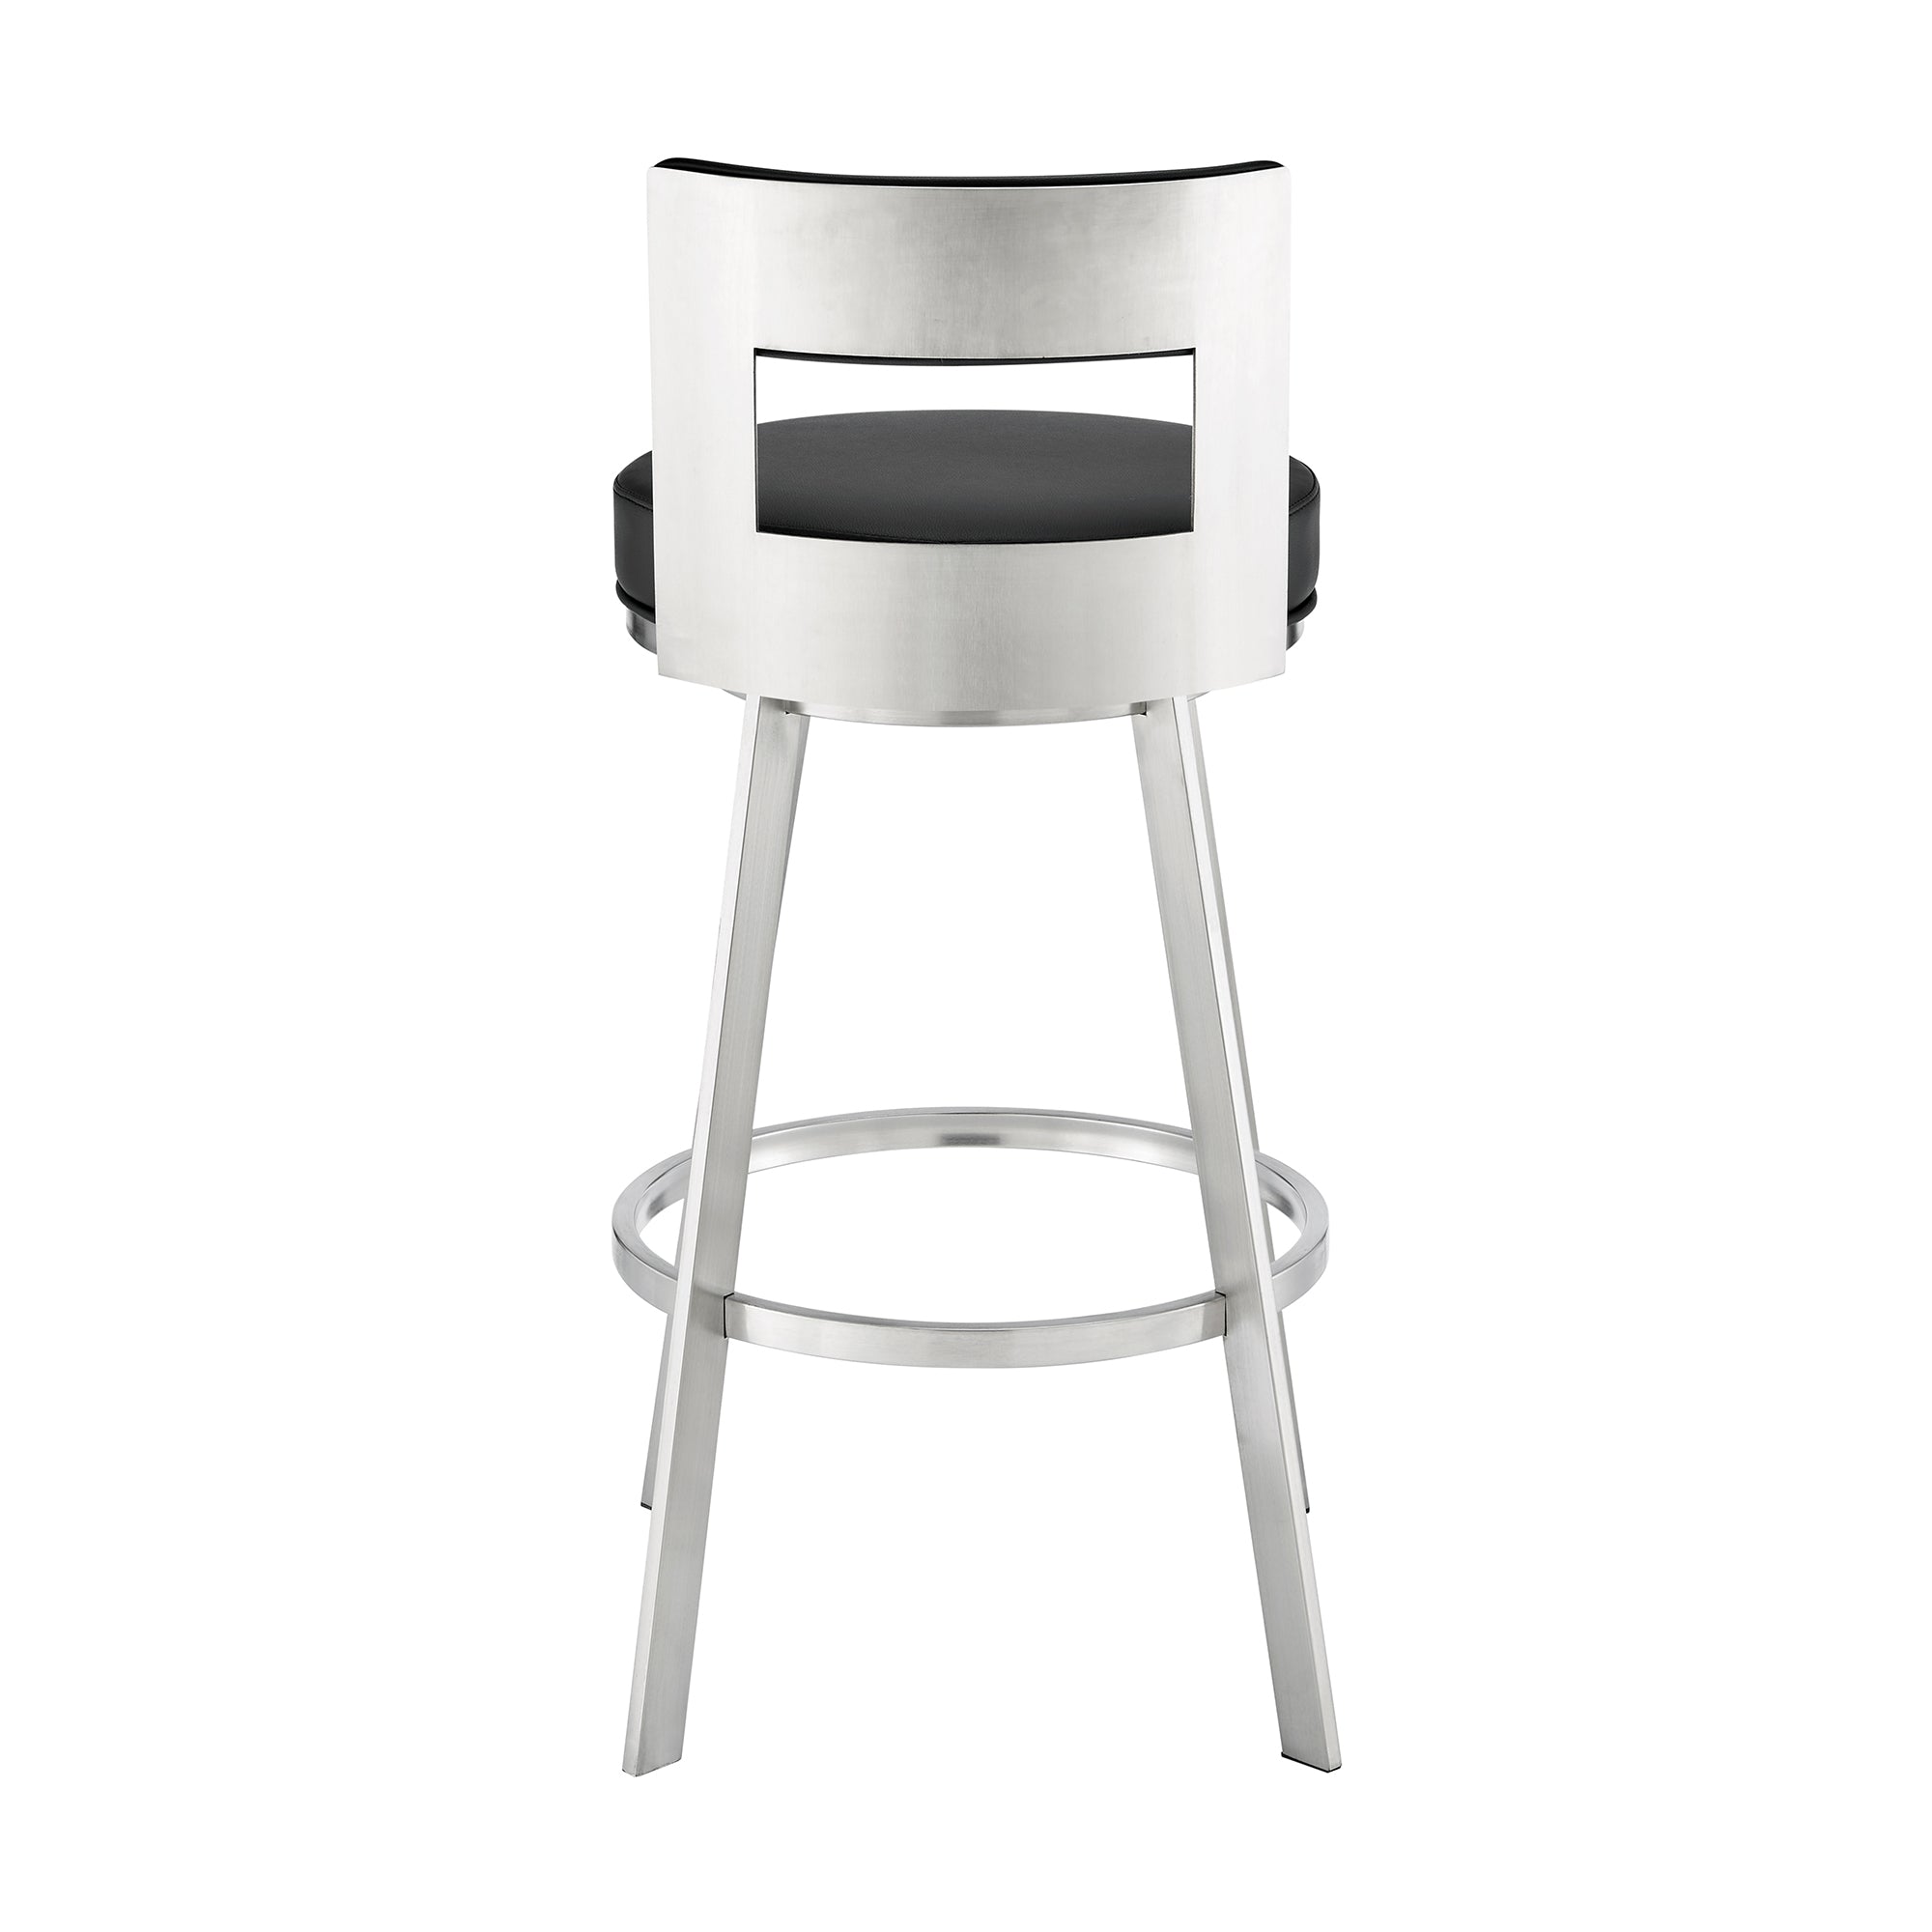 Armen Living - Lynof Swivel Counter or Bar Stool in Faux Leather and Metal - 840254335516